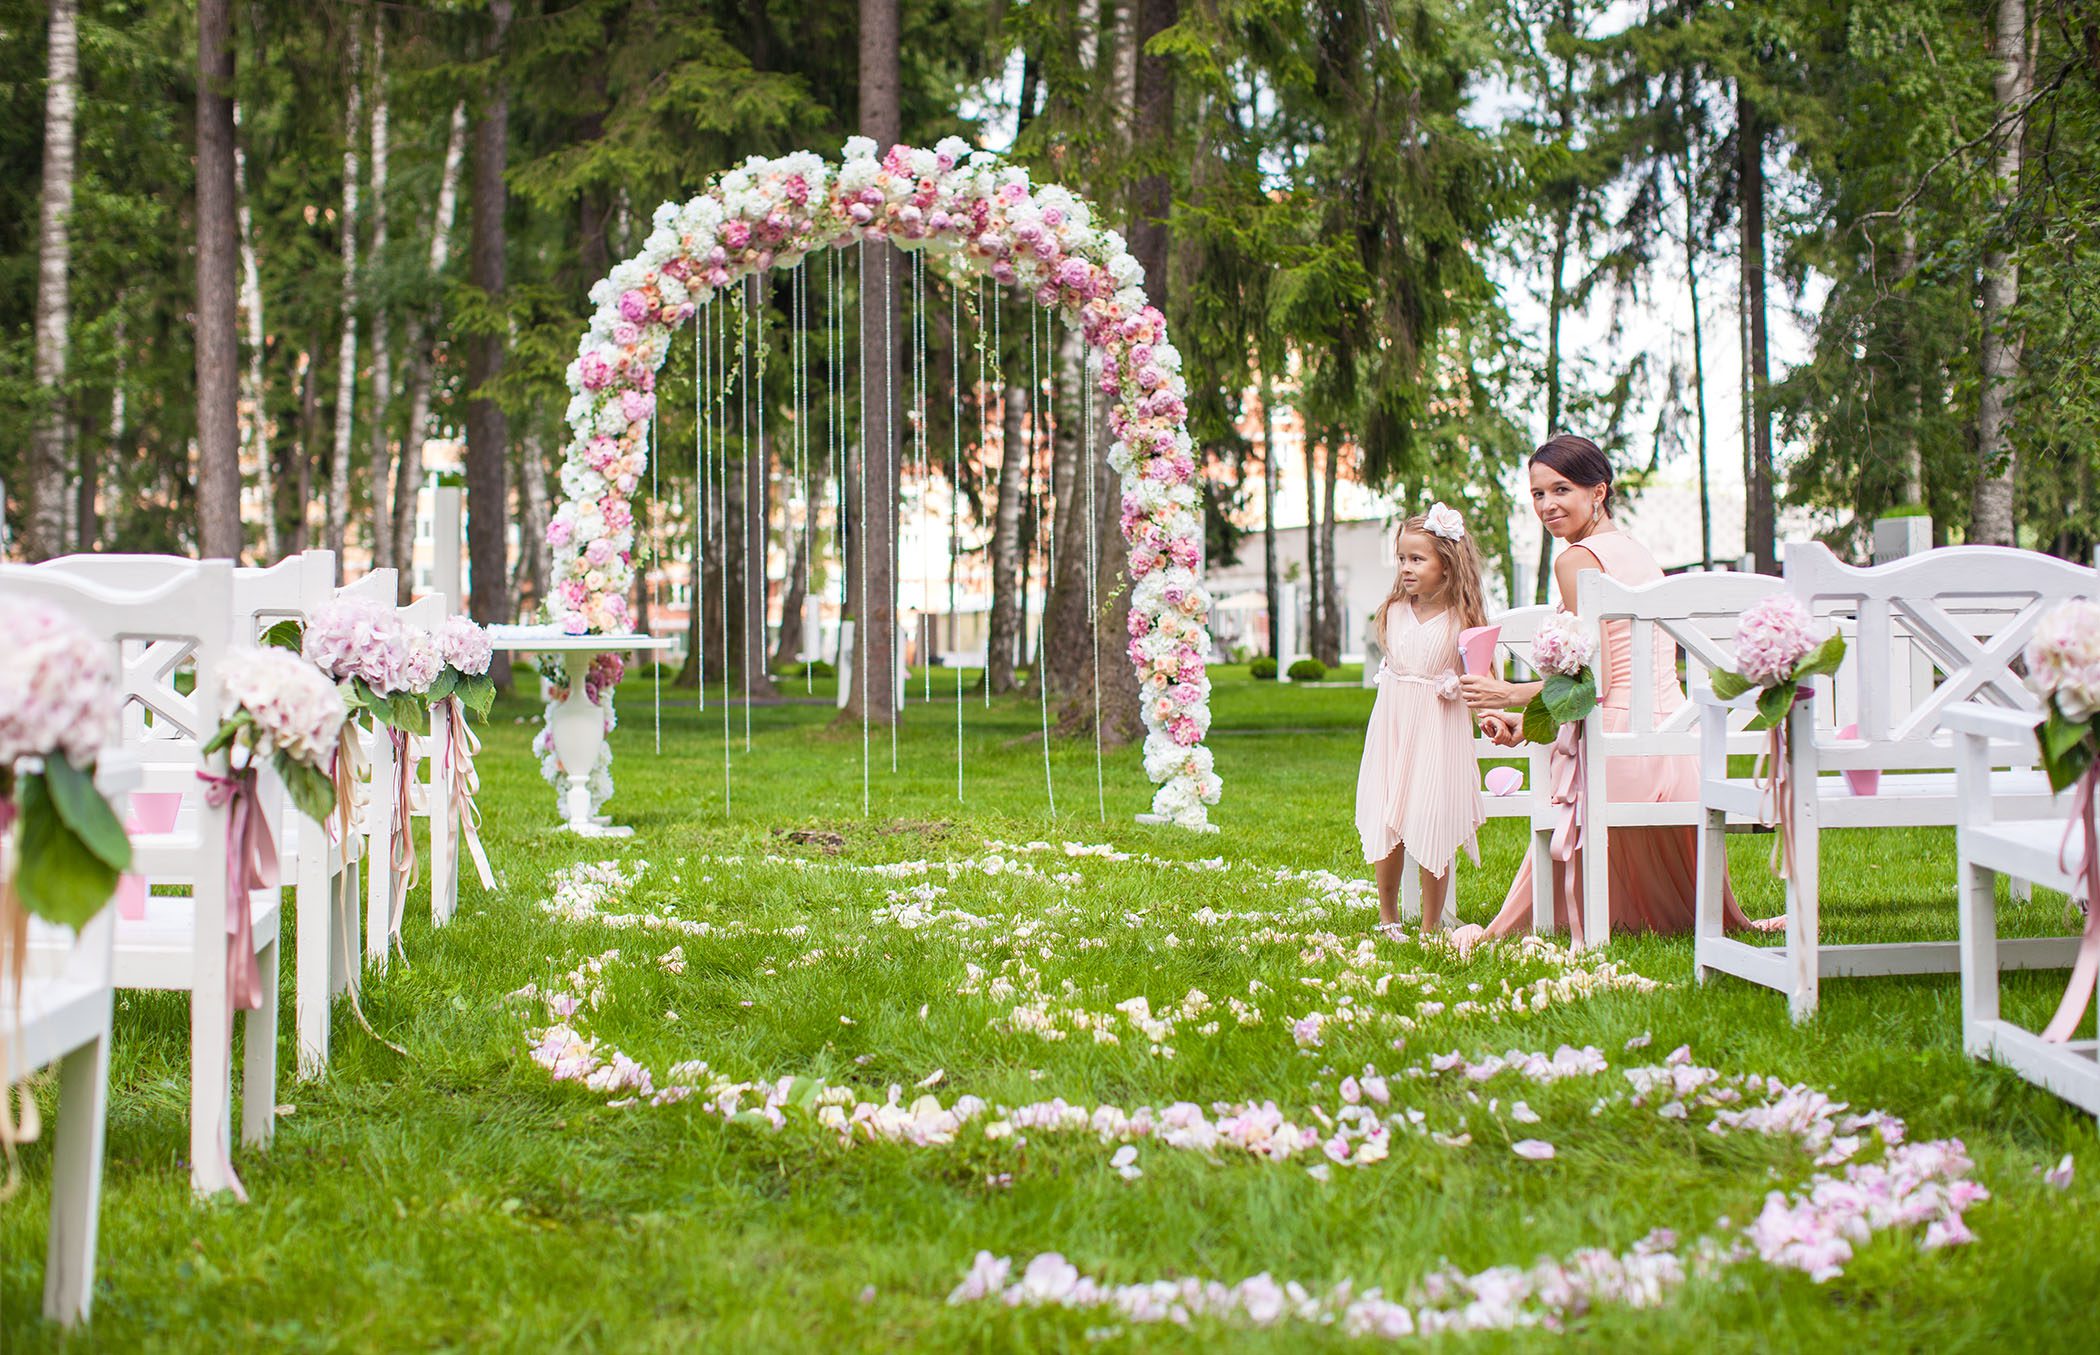 Wedding benches with guests and flower arch for ceremony outdoors